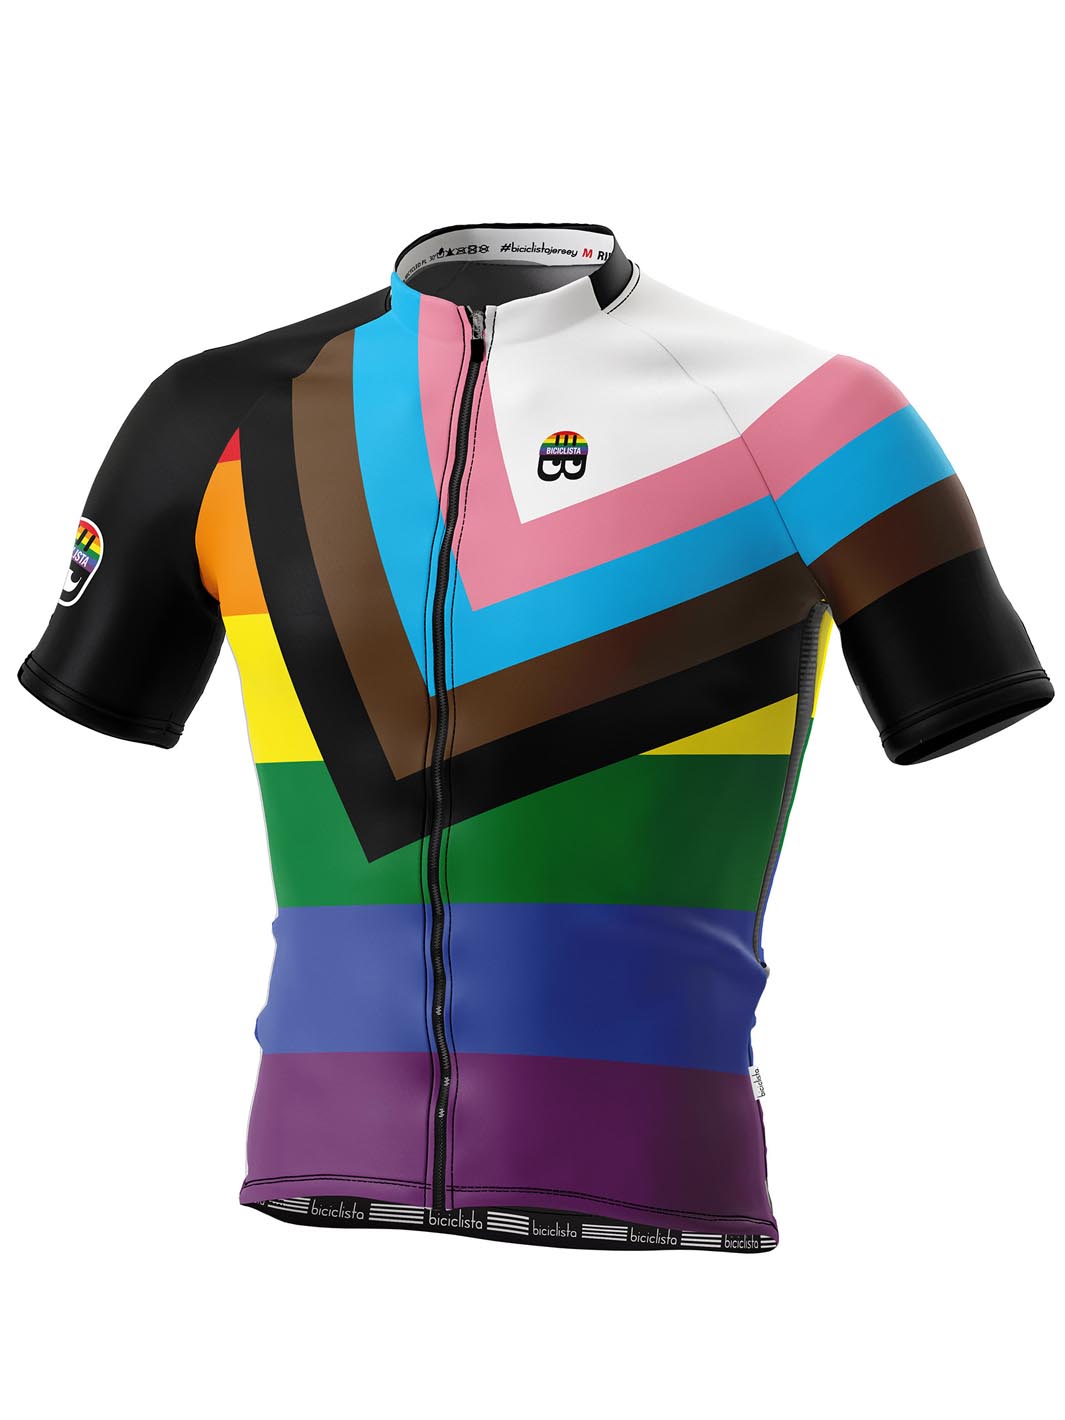 RIDE FREE - Men's Right-on Jersey